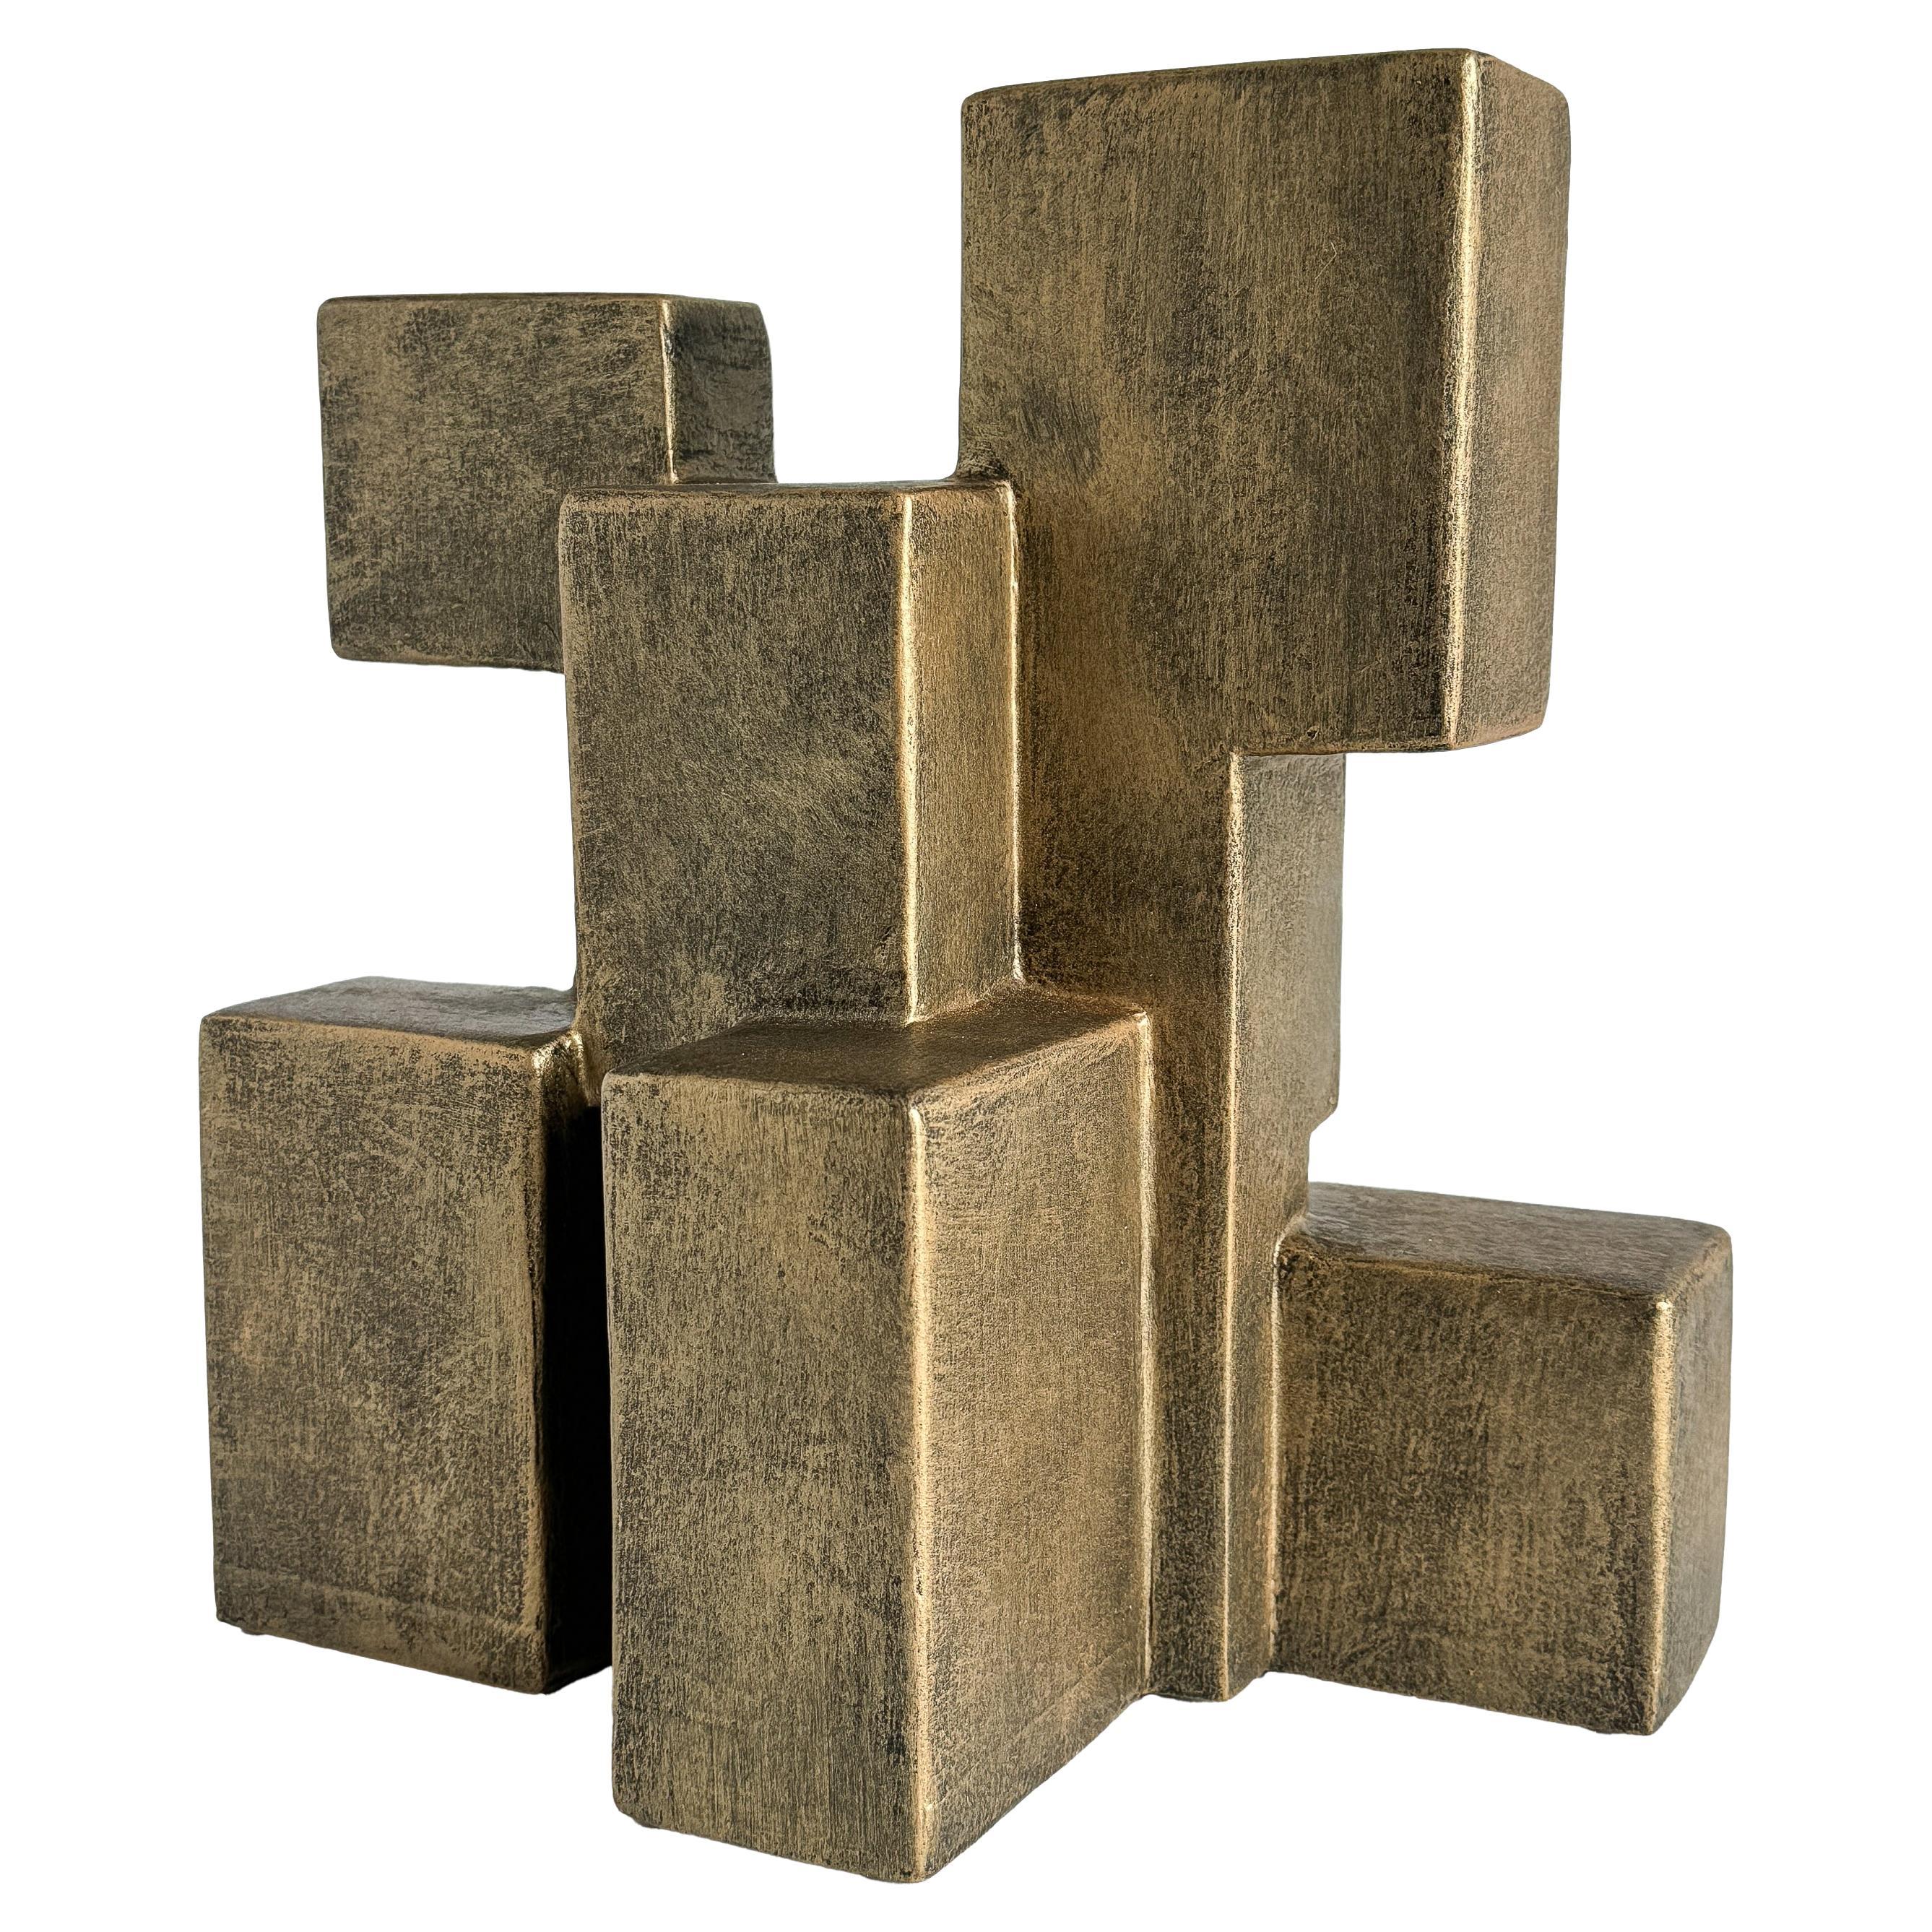 "Composition 202.3" Cubist Abstract Sculpture by Dan Schneiger For Sale